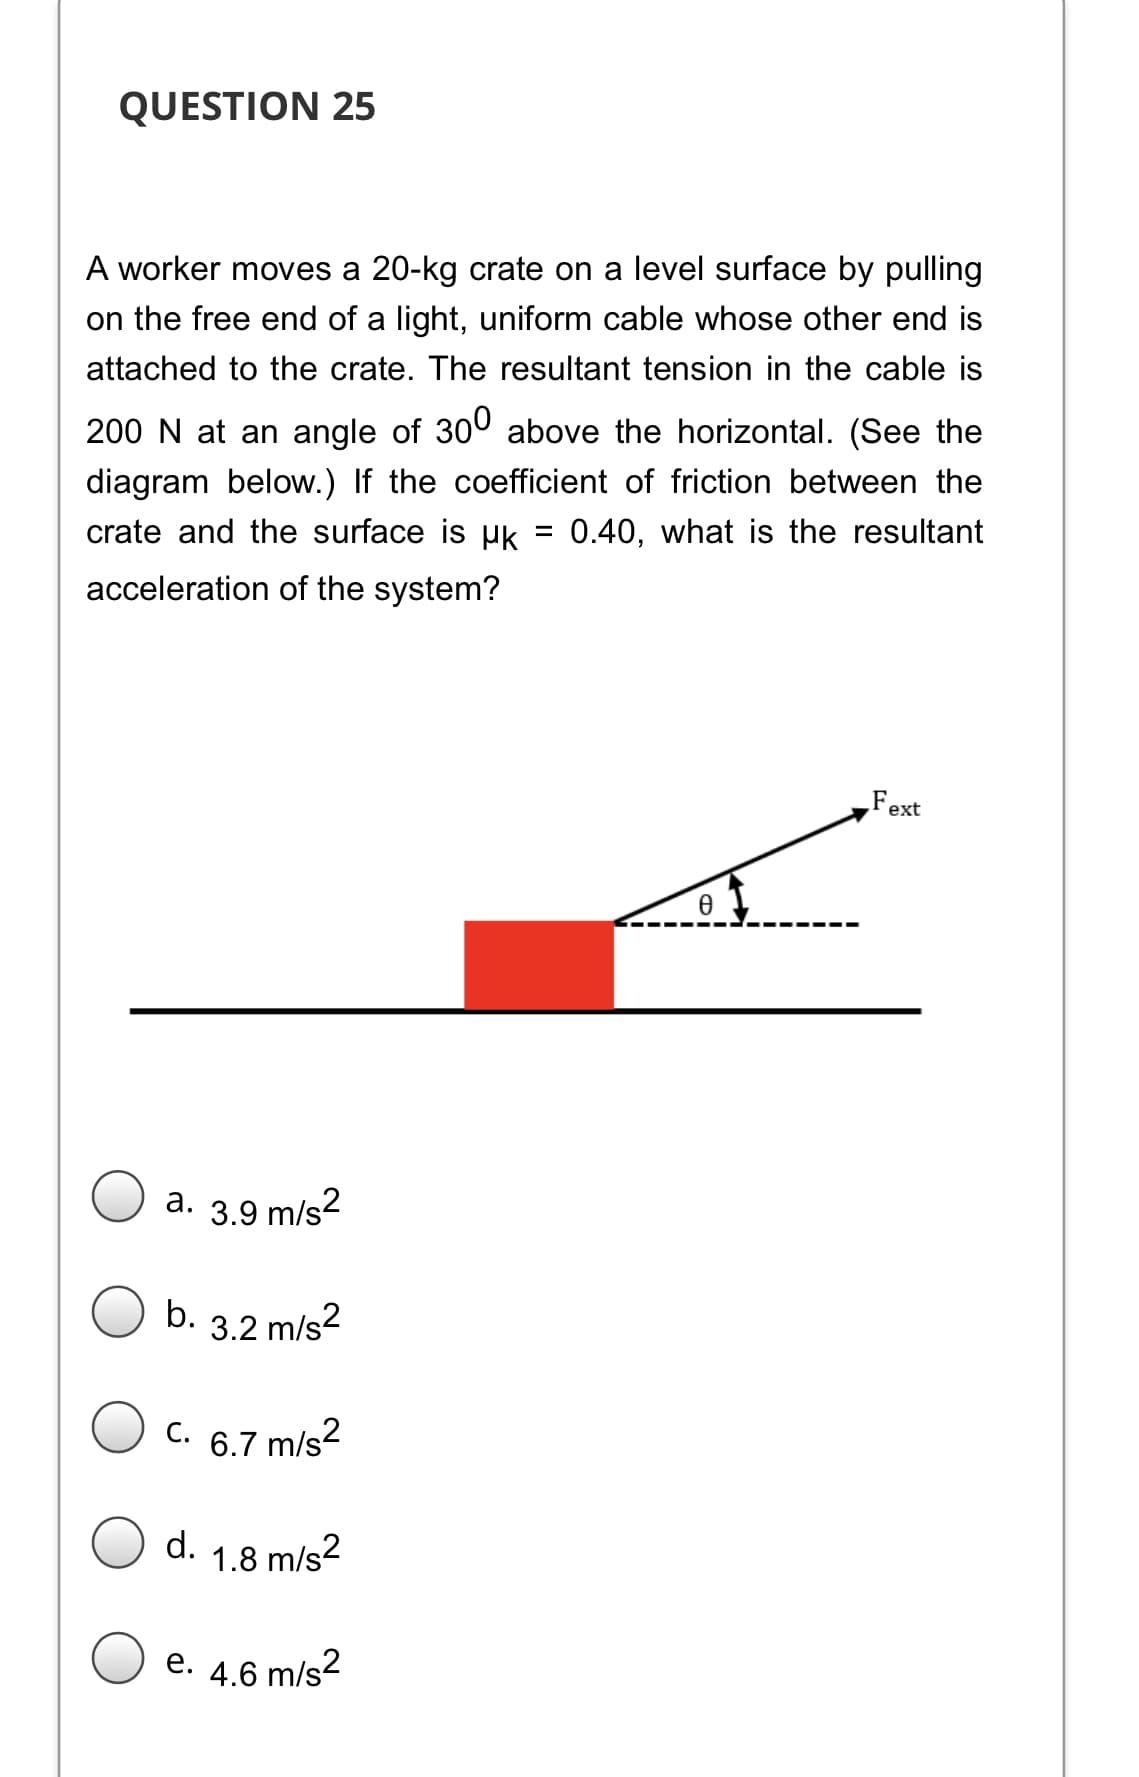 QUESTION 25
A worker moves a 20-kg crate on a level surface by pulling
on the free end of a light, uniform cable whose other end is
attached to the crate. The resultant tension in the cable is
200 N at an angle of 300 above the horizontal. (See the
diagram below.) If the coefficient of friction between the
crate and the surface is uk = 0.40, what is the resultant
%3D
acceleration of the system?
Fext
a. 3.9 m/s2
b. 3.2 m/s?
C. 6.7 m/s?
С.
d. 1.8 m/s2
e. 4.6 m/s?
